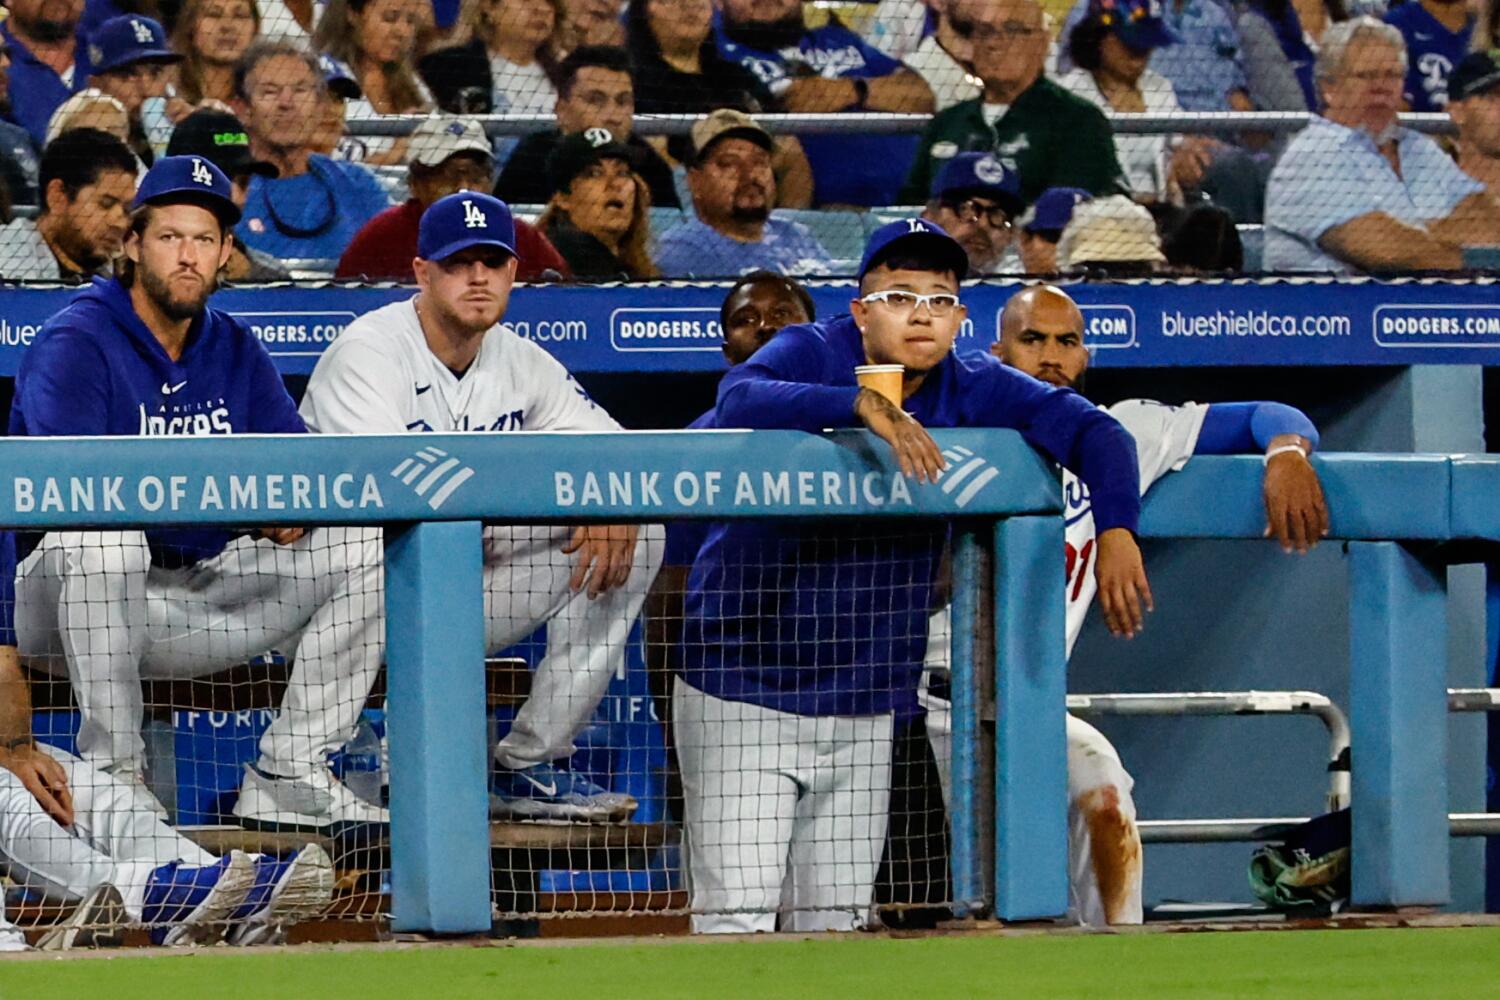 Julio Urías was a hero and likely Dodgers Game 1 starter. Now, it's as if he never existed